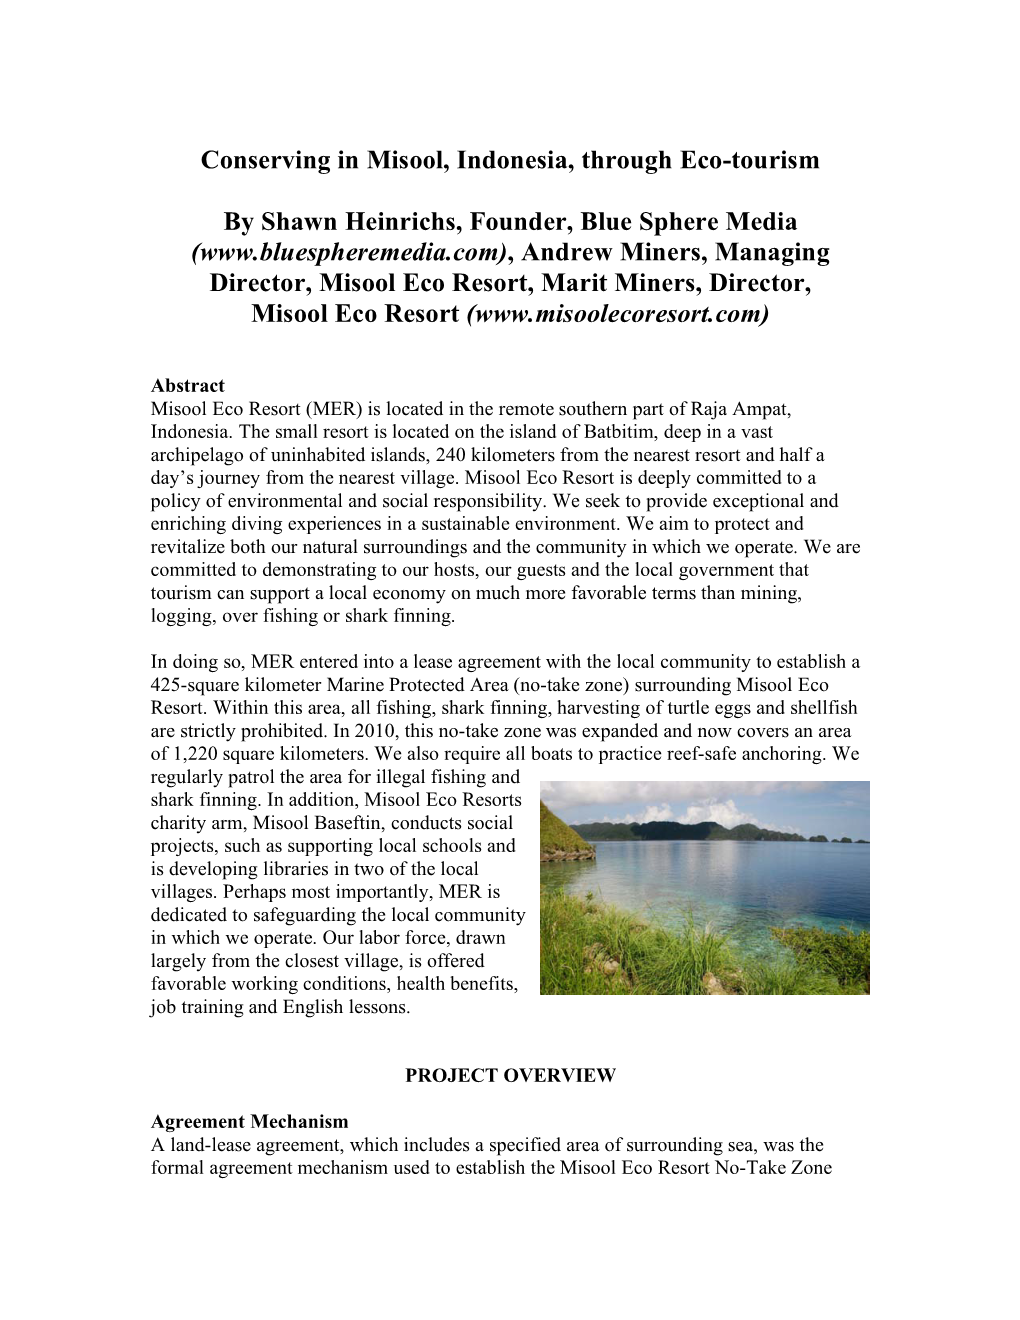 Conserving in Misool, Indonesia, Through Eco-Tourism by Shawn